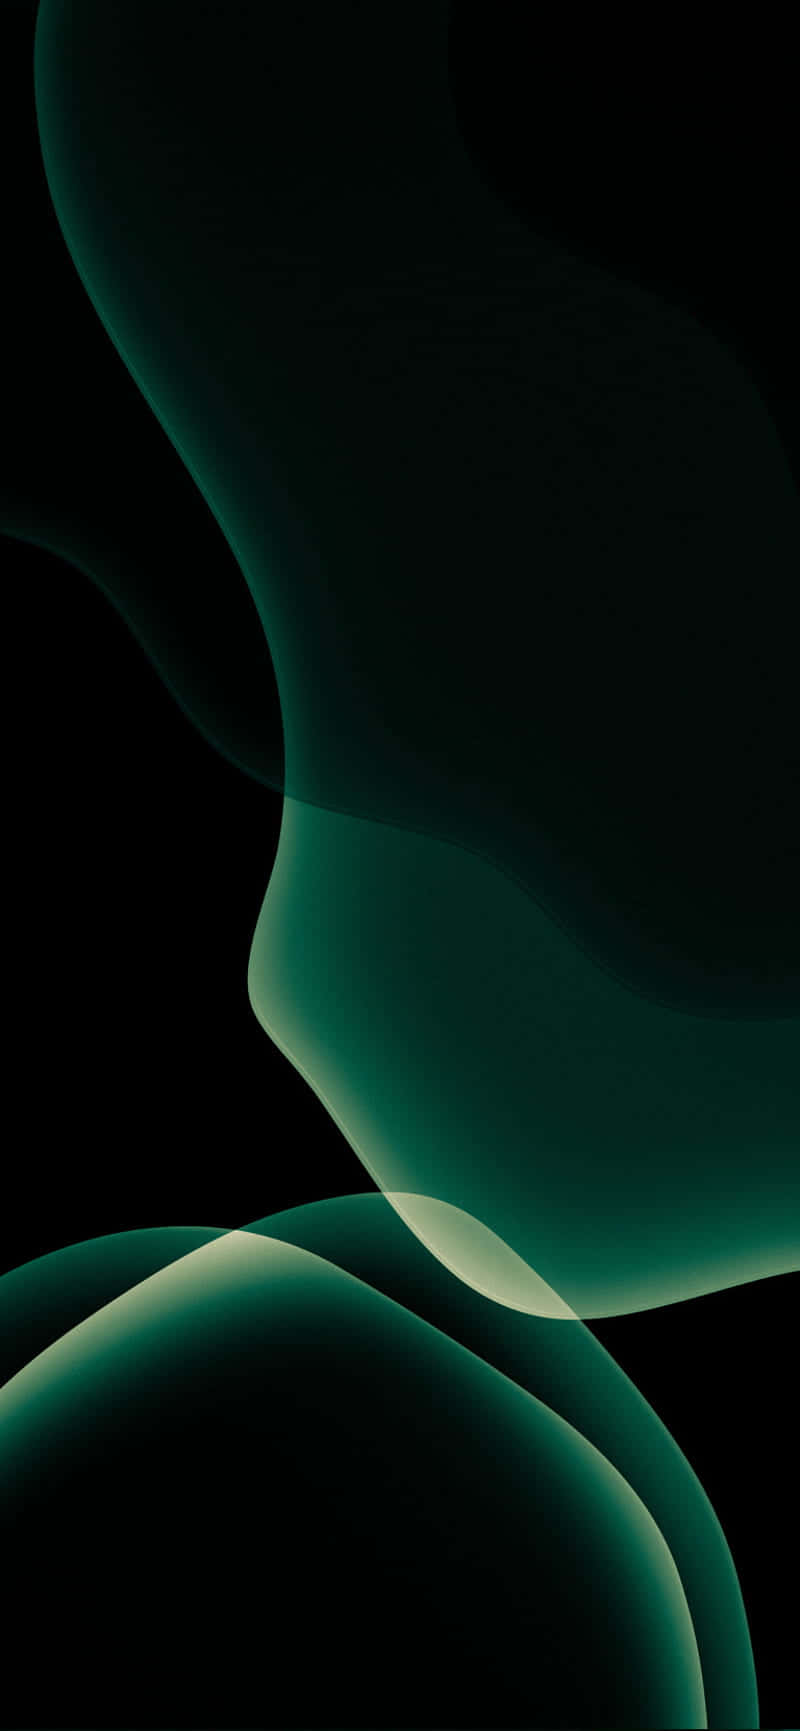 Get Ready for the Next Generation of iPhones – the iPhone 11 Pro Black Wallpaper